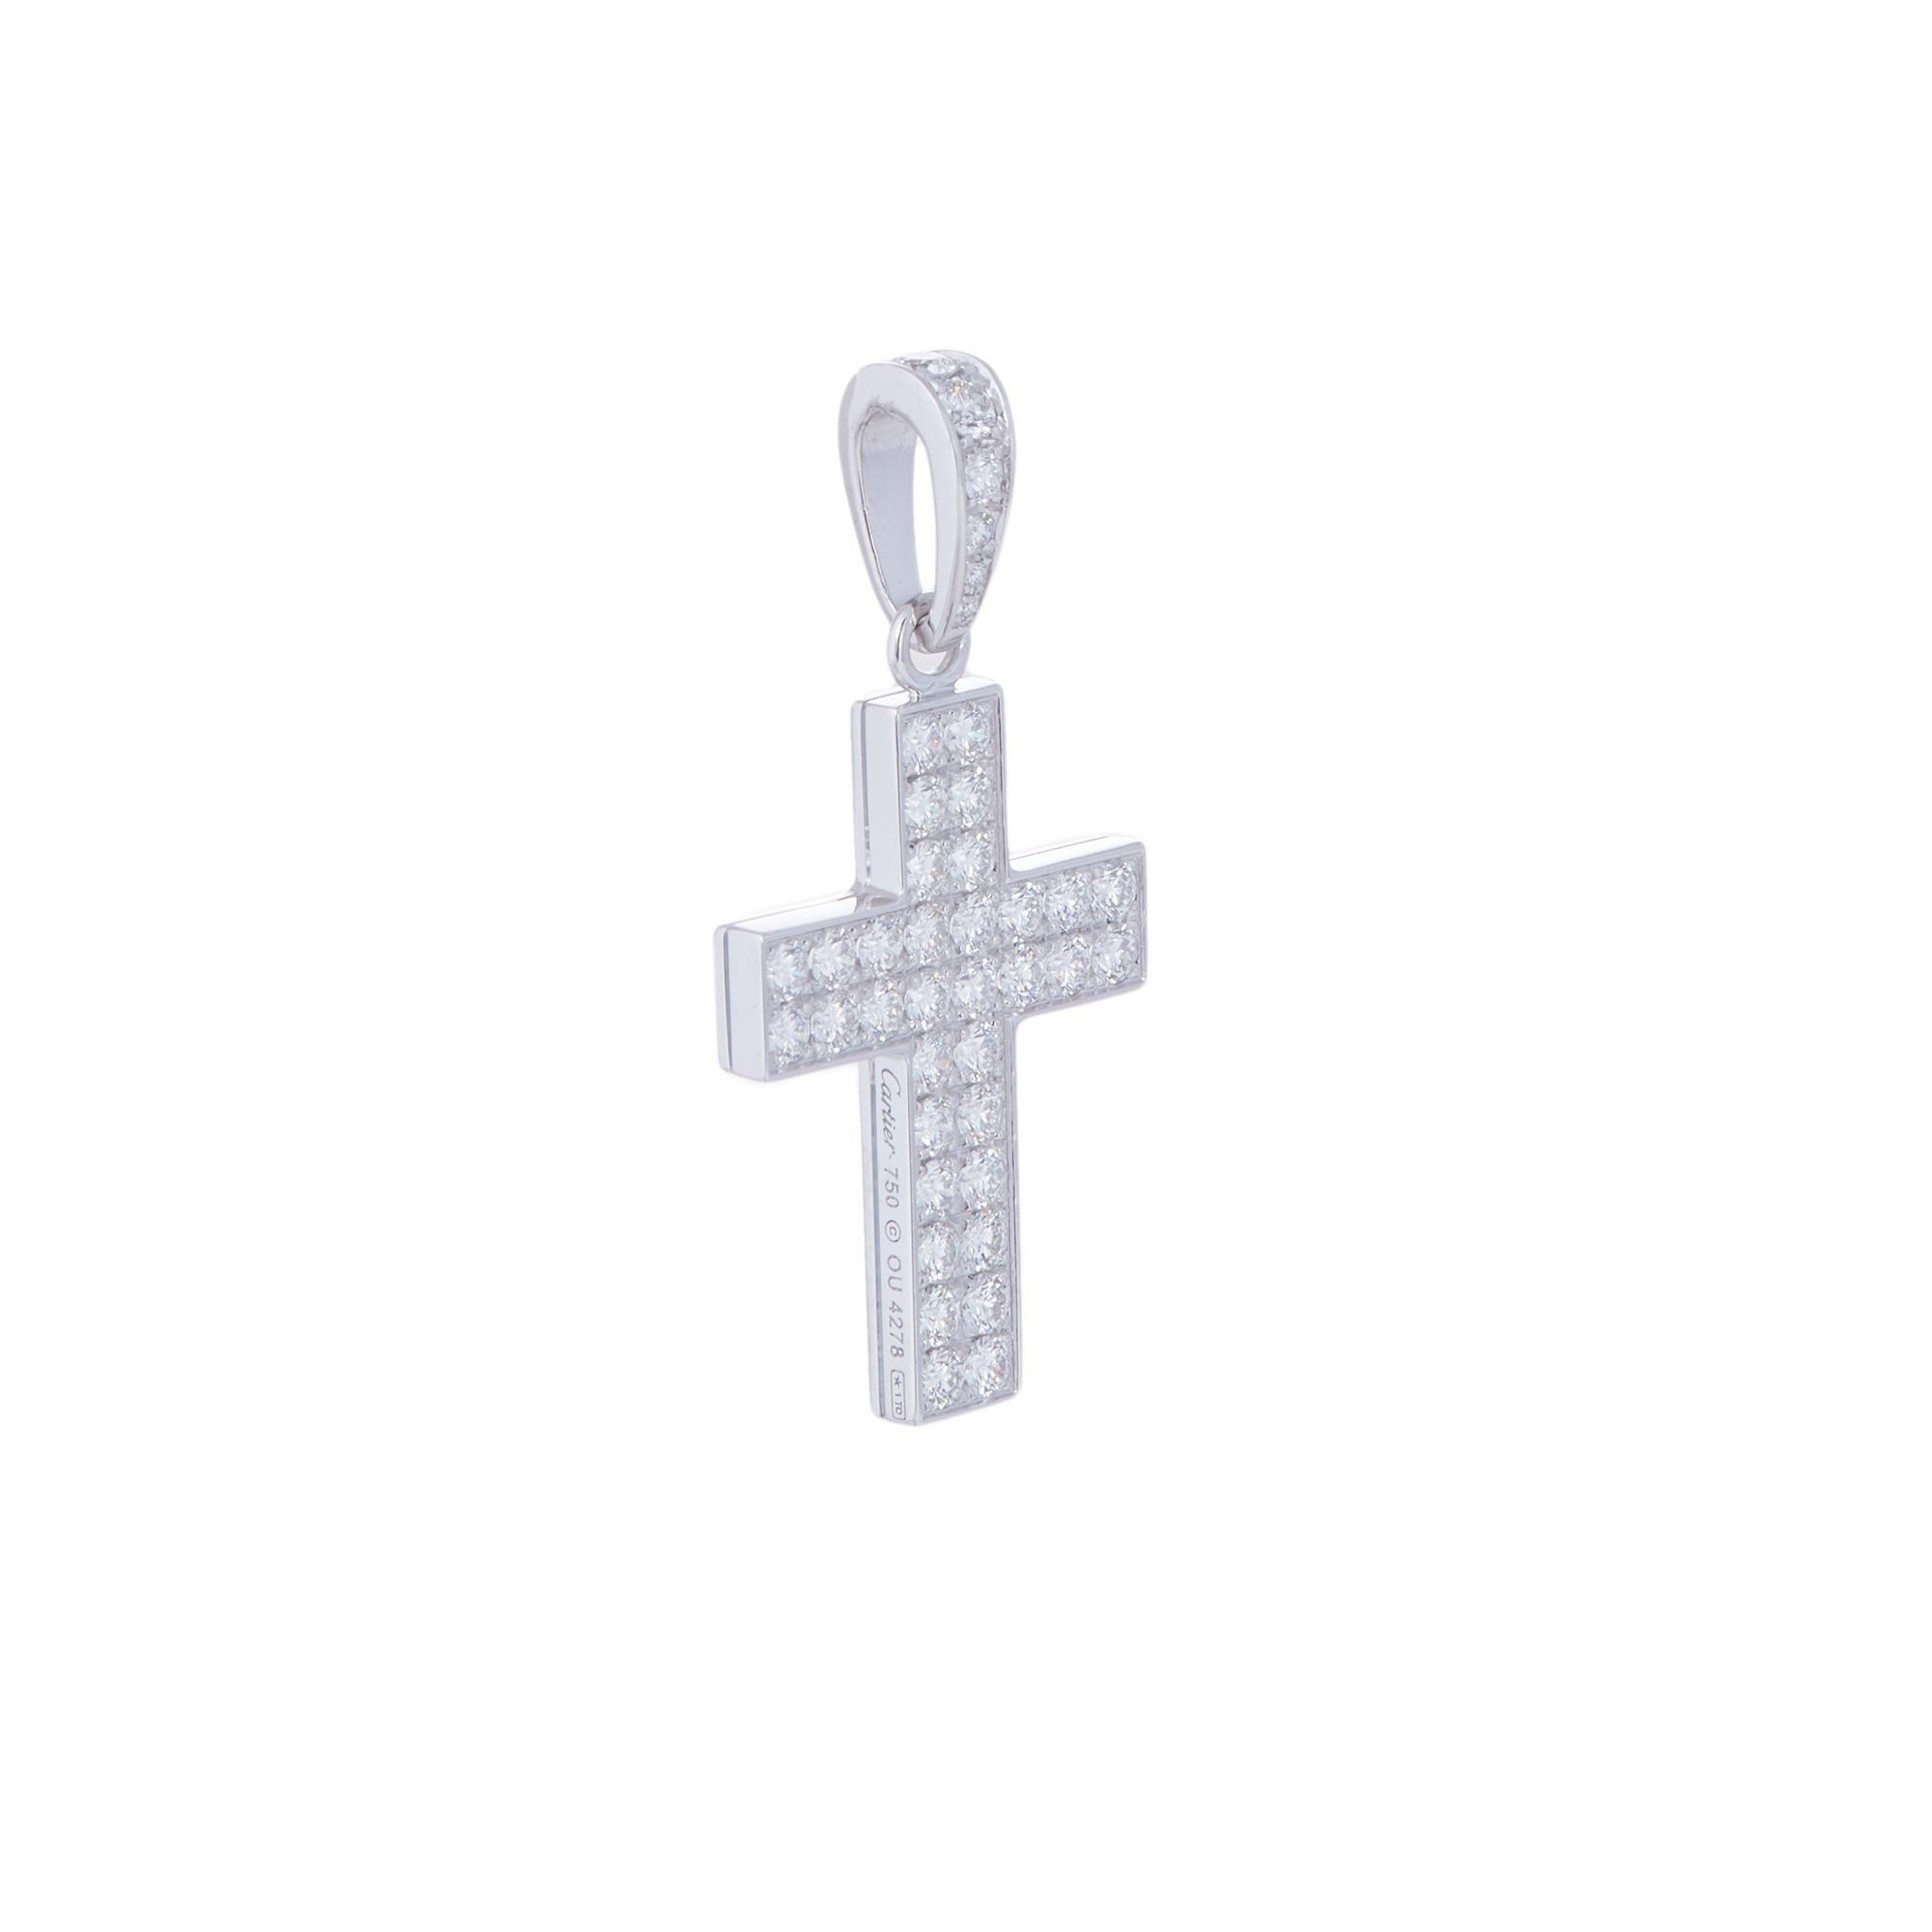 Authentic Cartier cross pendant crafted in 18 karat white gold.  The pendant is set with glittering round brilliant cut diamonds on the cross and bale for an estimated 1.75 carats total weight.  The cross measures 1 inch in length and 0.73 inches